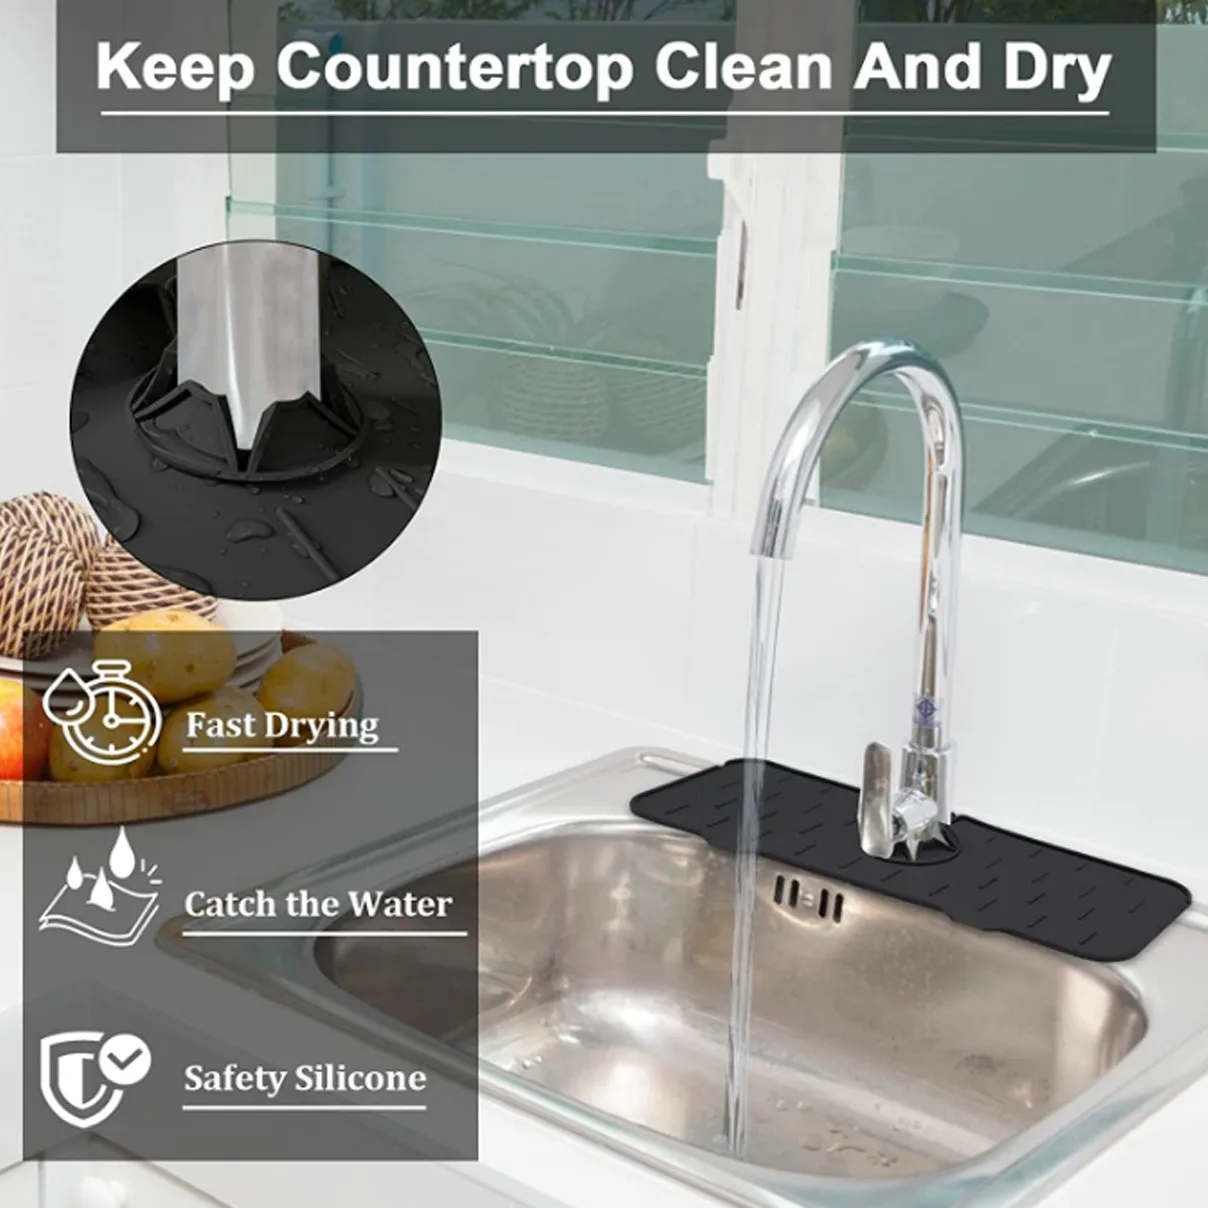 https://ae01.alicdn.com/kf/S7c0d2708eaaa4757af19a7cb3439c3c7E/Silicone-Faucet-Sink-Splash-Guard-Handle-Drip-Catcher-Tray-Water-with-Drainage-Edge-Kitchen-Item-Accessorie.jpg